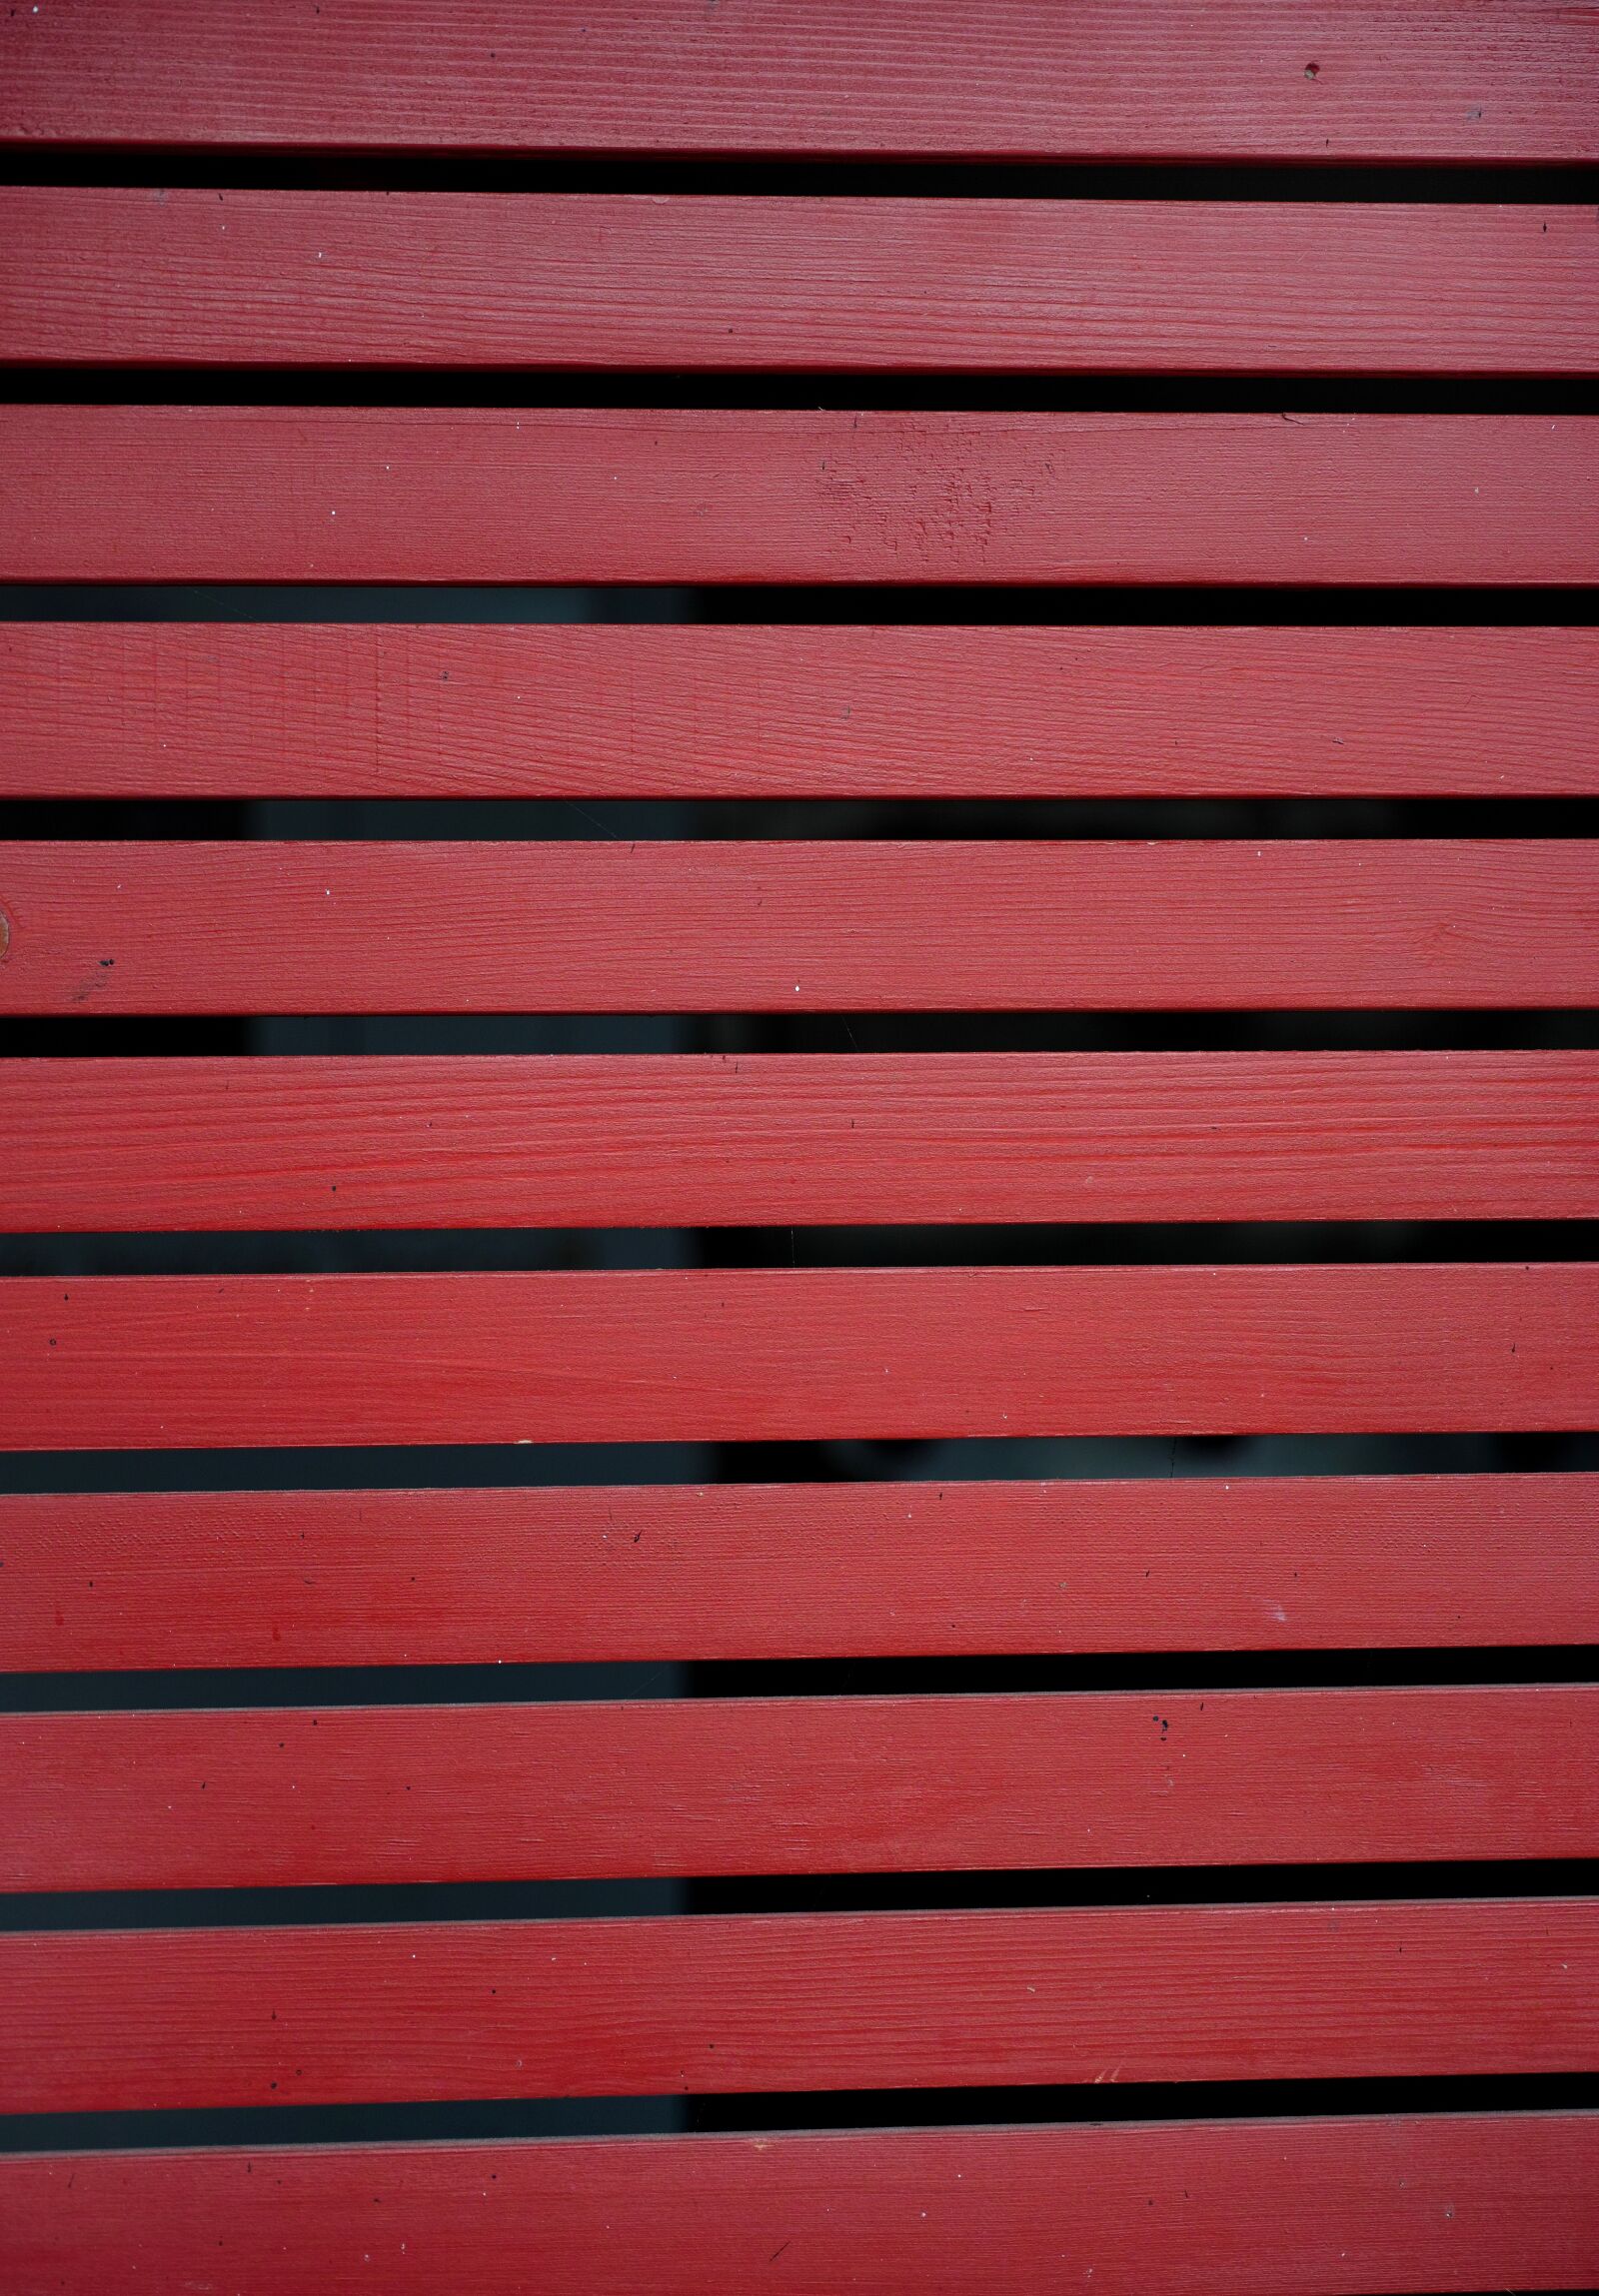 Sigma DP3 Merrill sample photo. Wood-fibre boards, red, texture photography